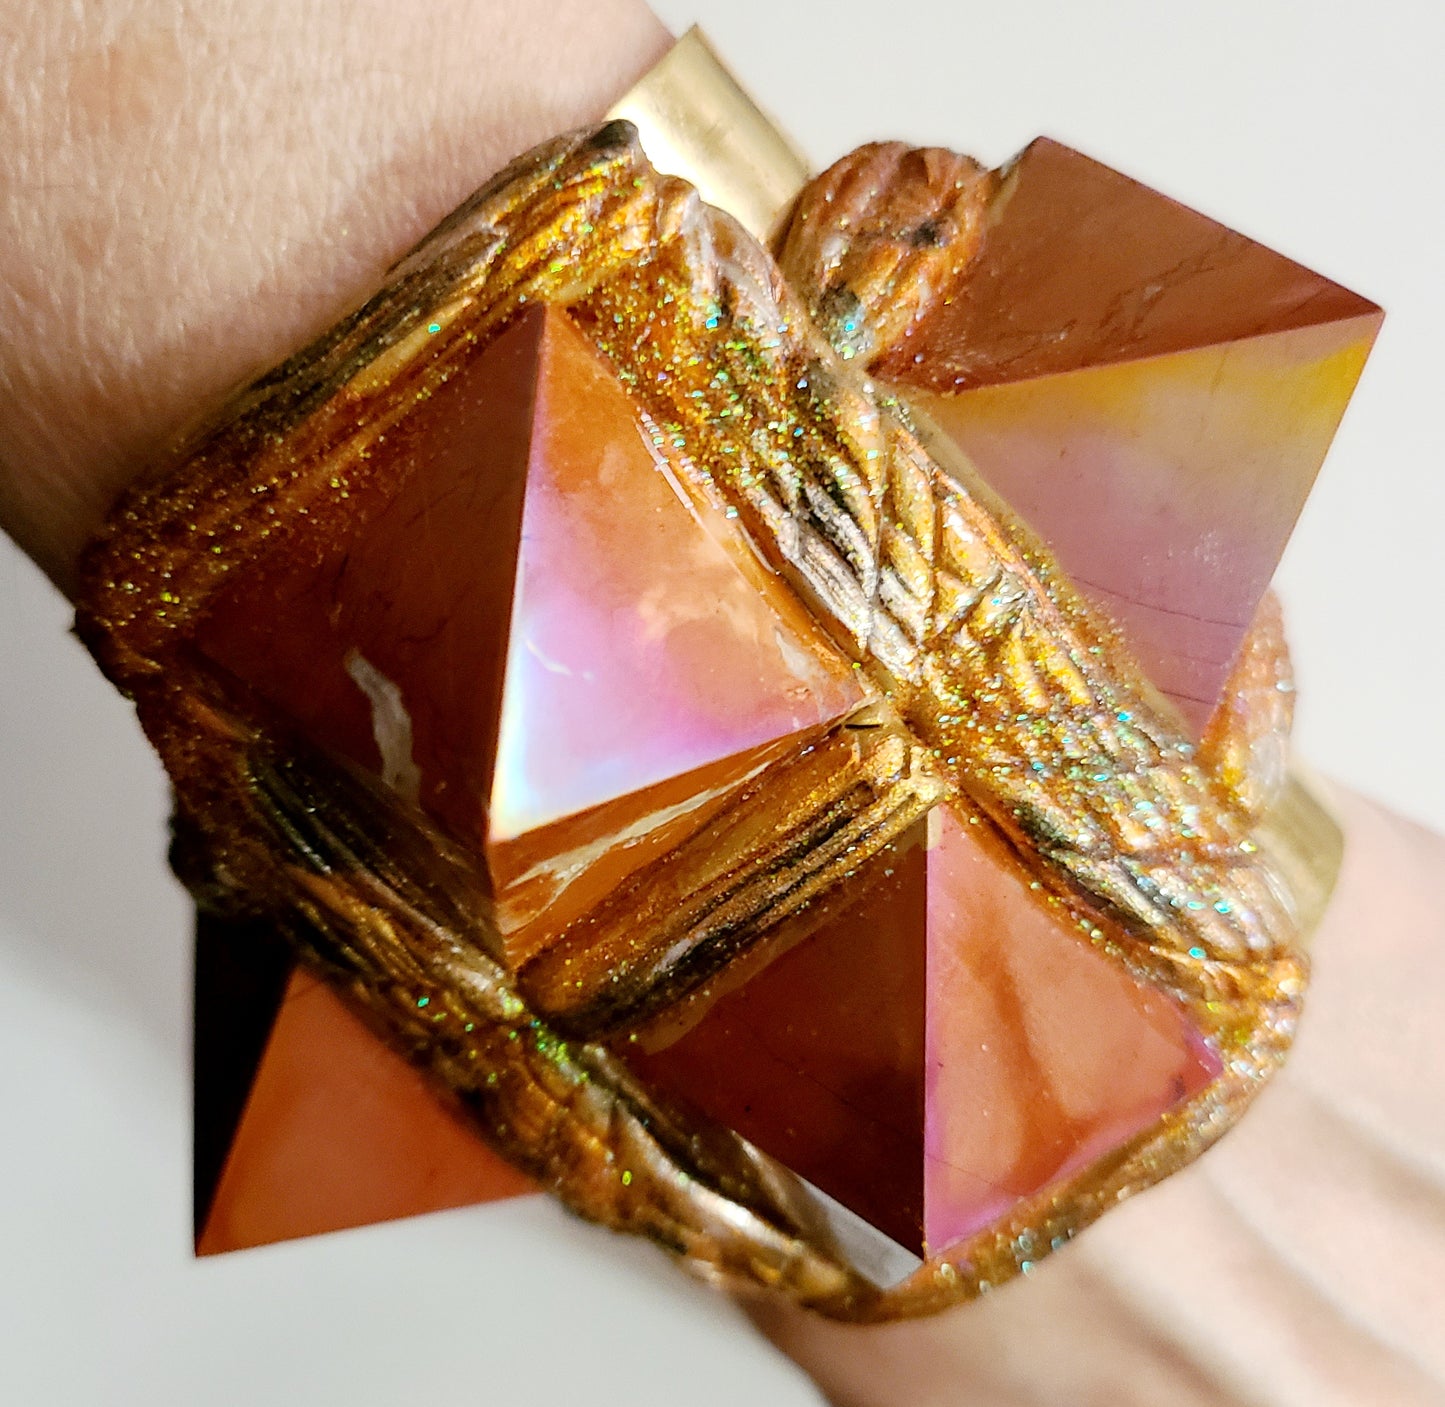 Cuff Statement Sculpted Red Jasper Pyramids, Bangle Fantasy Egyptian Revival Oversized, Wrist Candy Gold & Copper